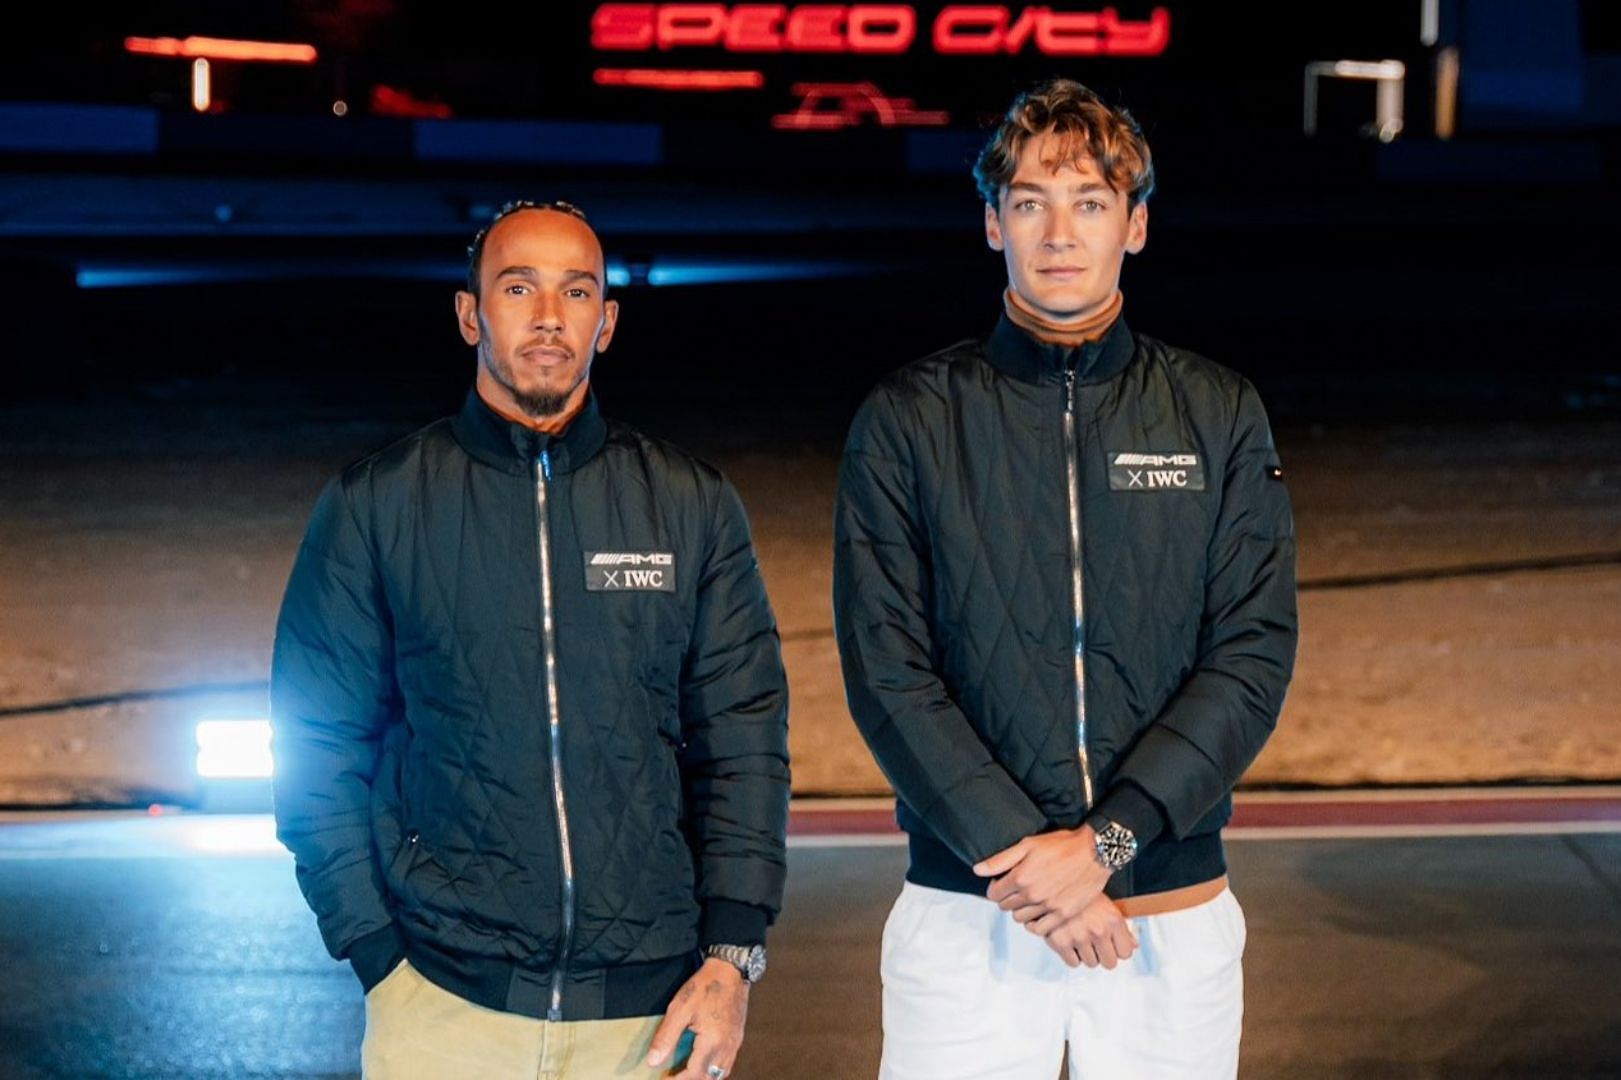 Lewis Hamilton (L) and George Russell (R) (Image via X/@MercedesAMGF1)